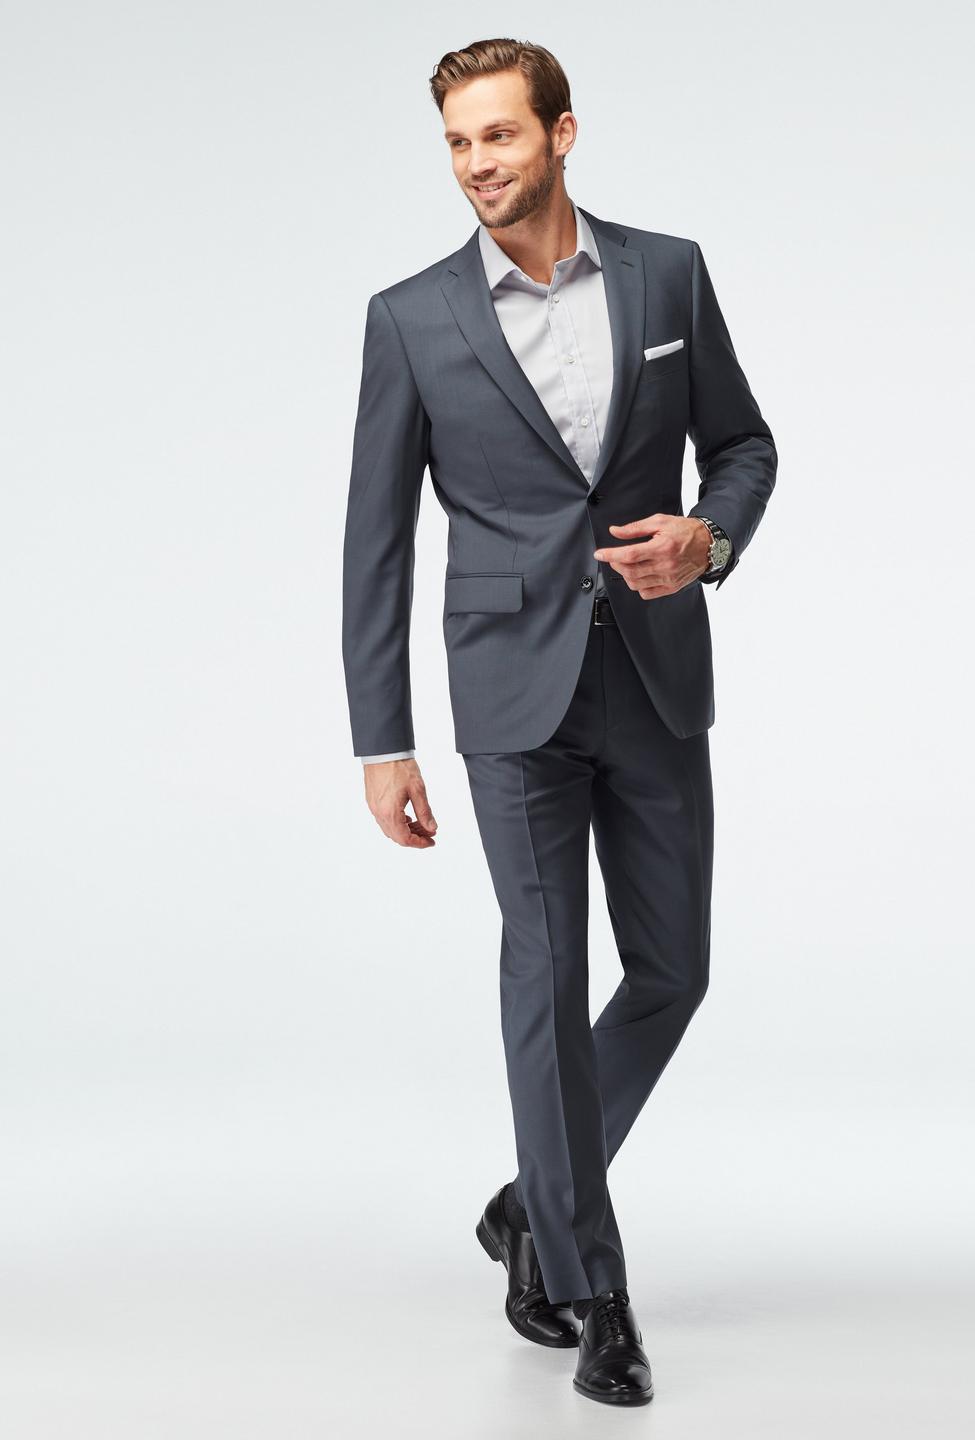 Gray blazer - Milano Solid Design from Indochino Collection